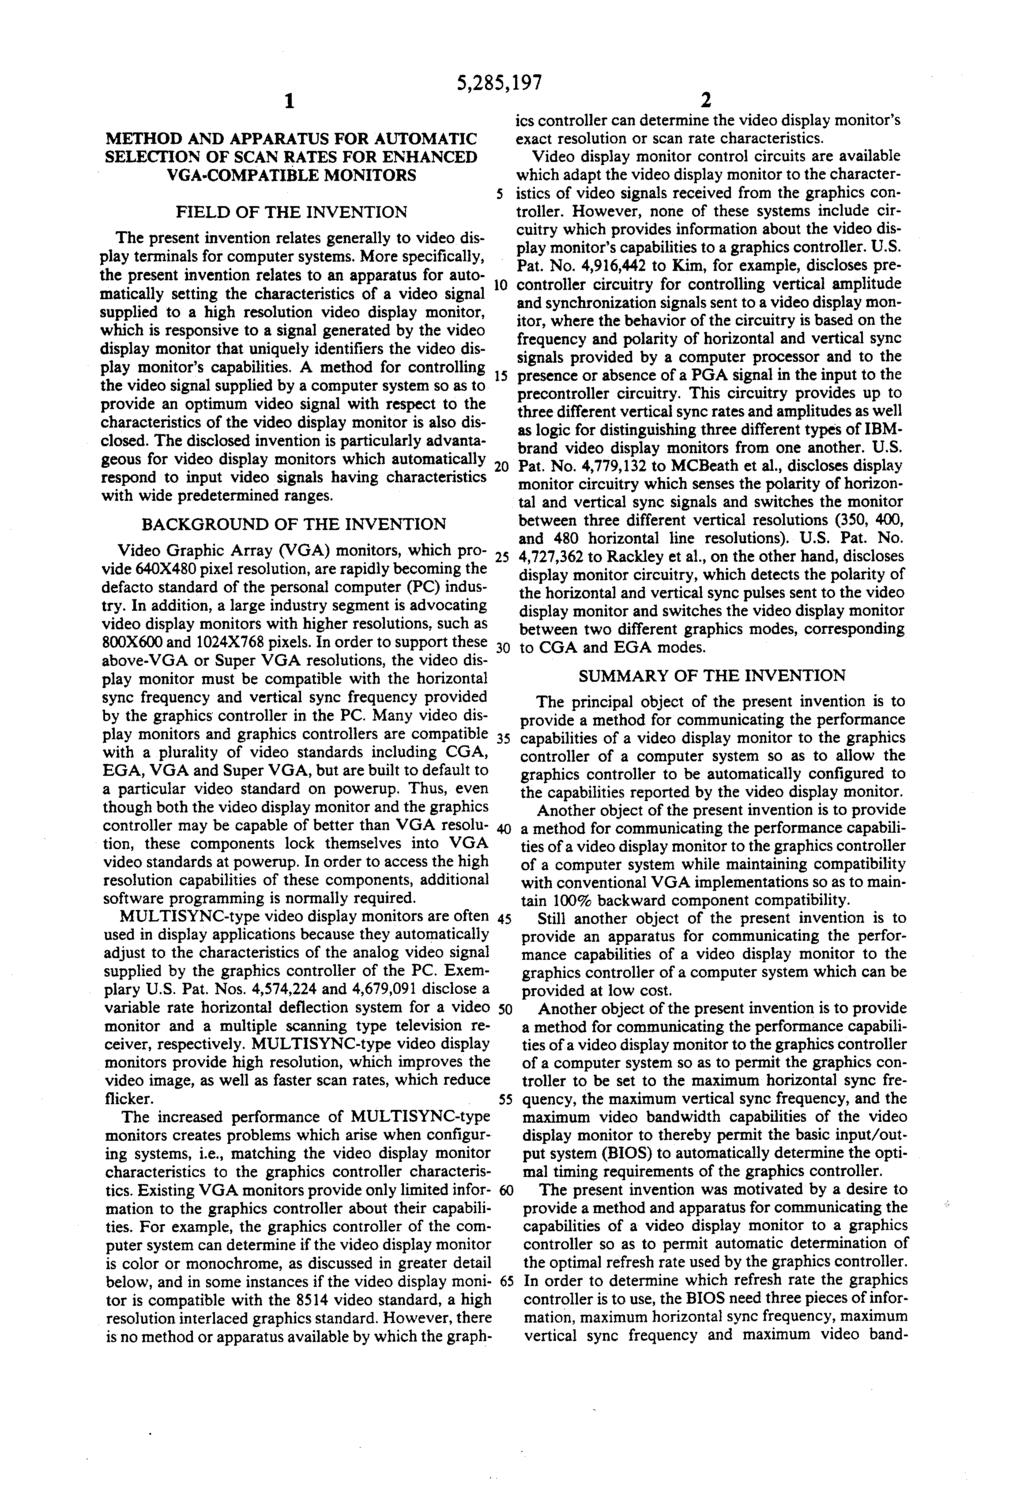 1. METHOD AND APPARATUS FOR AUTOMATIC SELECTION OF SCAN RATES FOR ENHANCED VGA-COMPATIBLE MONITORS FIELD OF THE INVENTION The present invention relates generally to video dis play terminals for